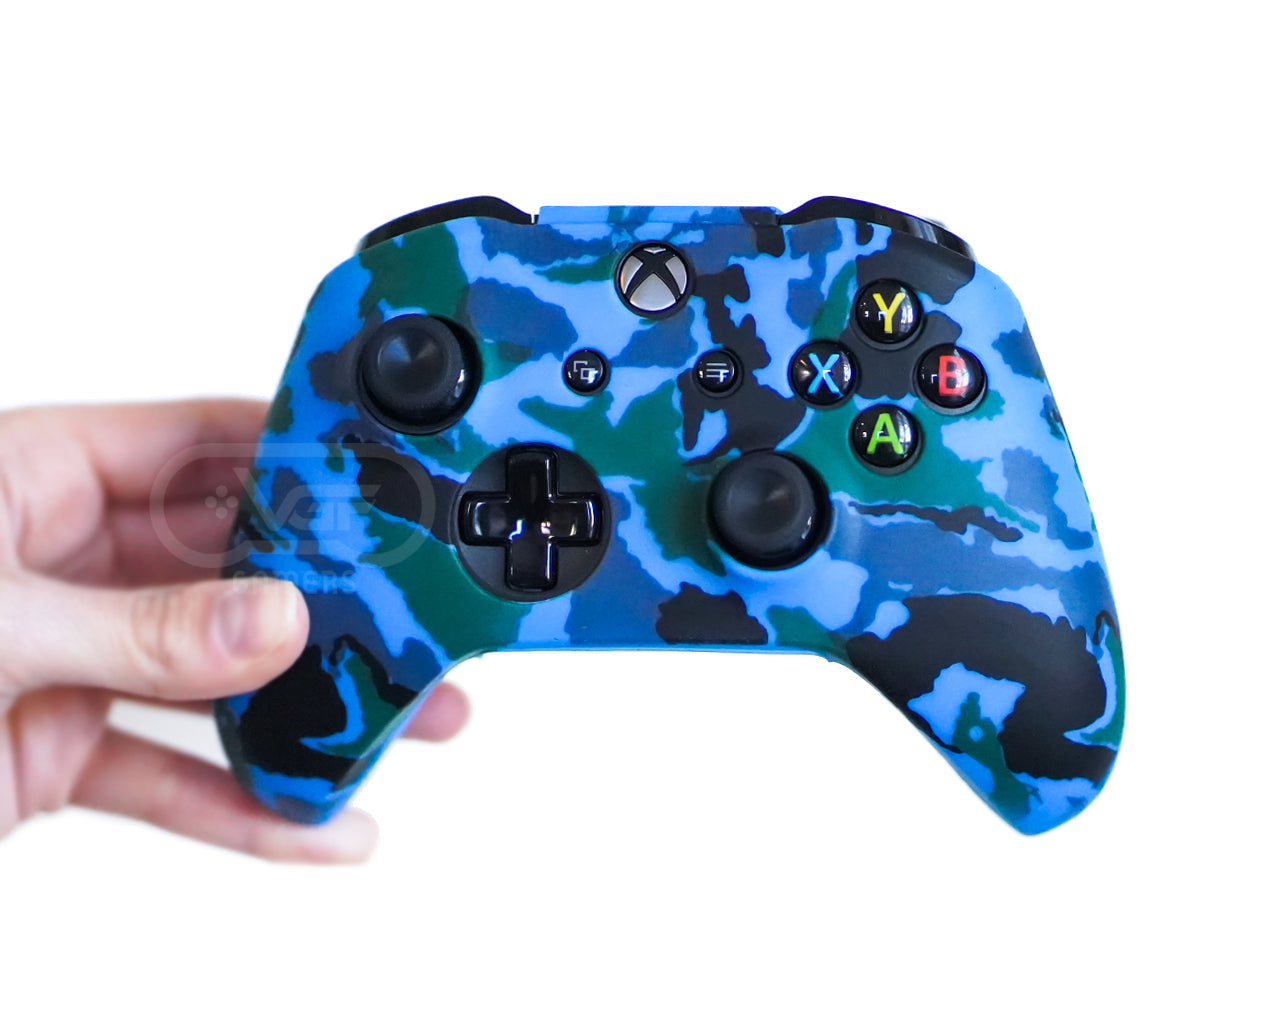 camouflage xbox controller